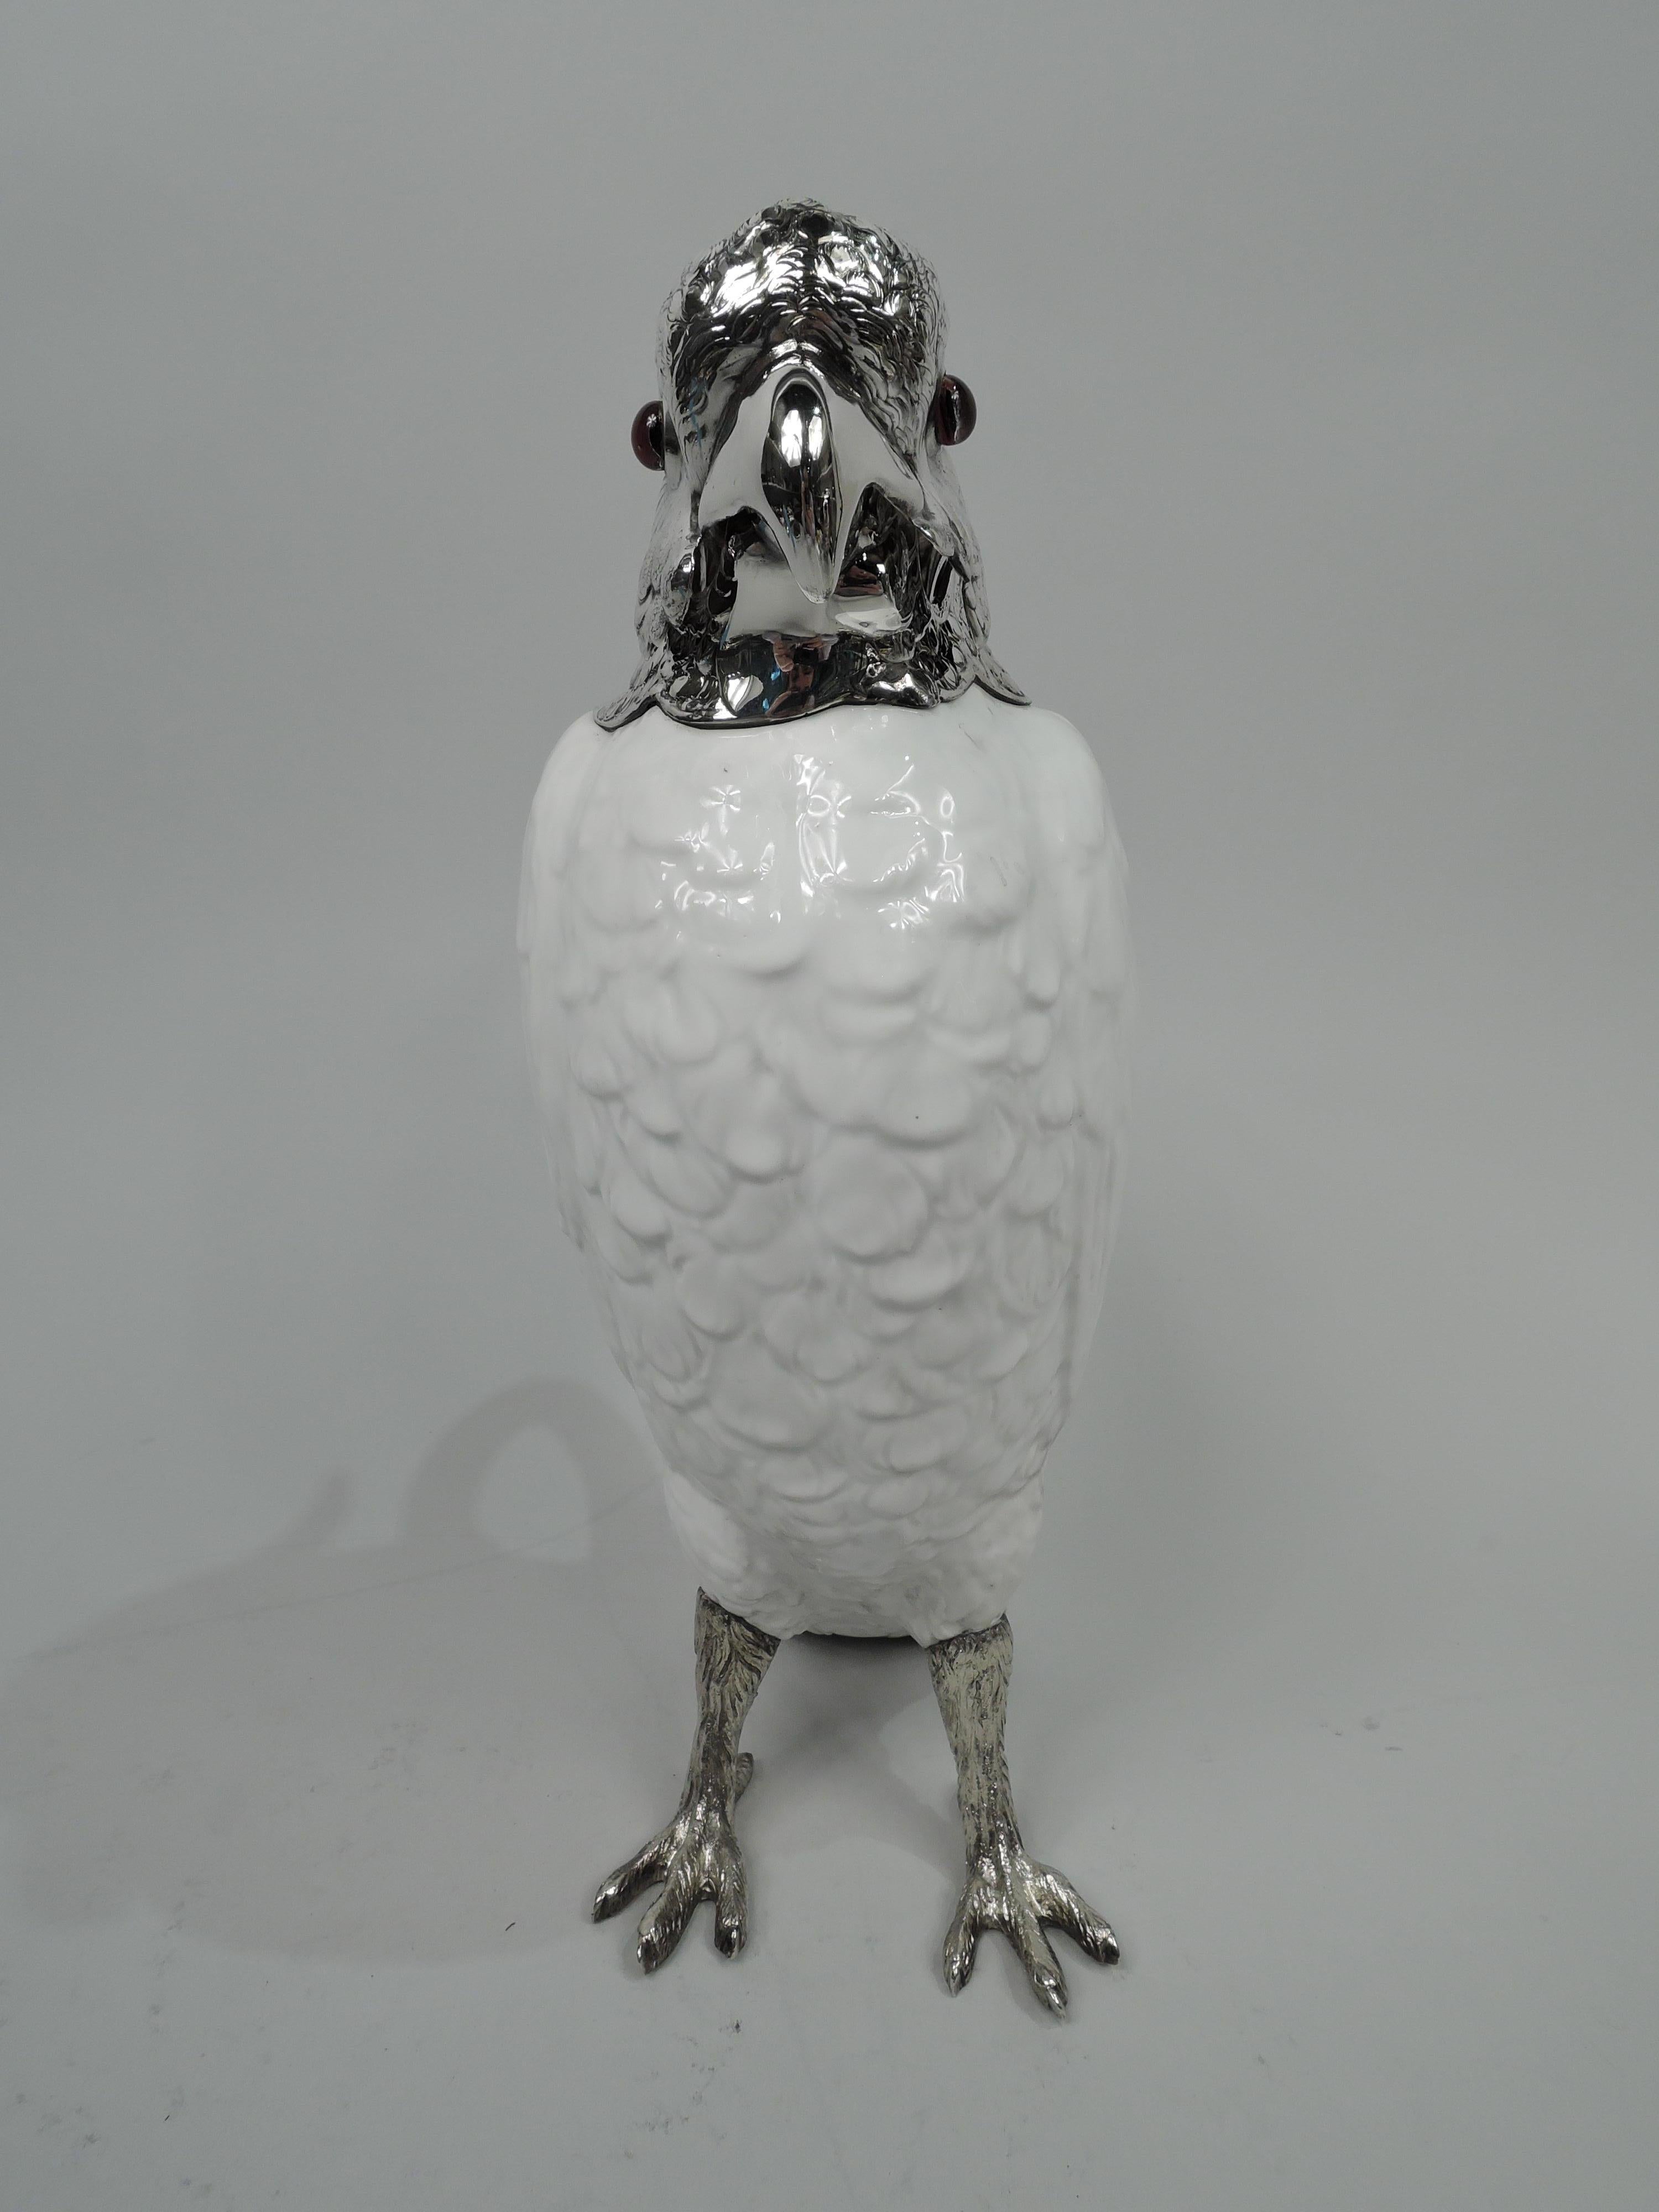 English figural cockatoo decanter, 1913. Blanc de chine body with softly delineated plumage and plain c-scroll handle. Sterling silver stocky legs with scaley talons as well as head with dramatic crown, funny, saggy jowls, and red glass eyes; hinged